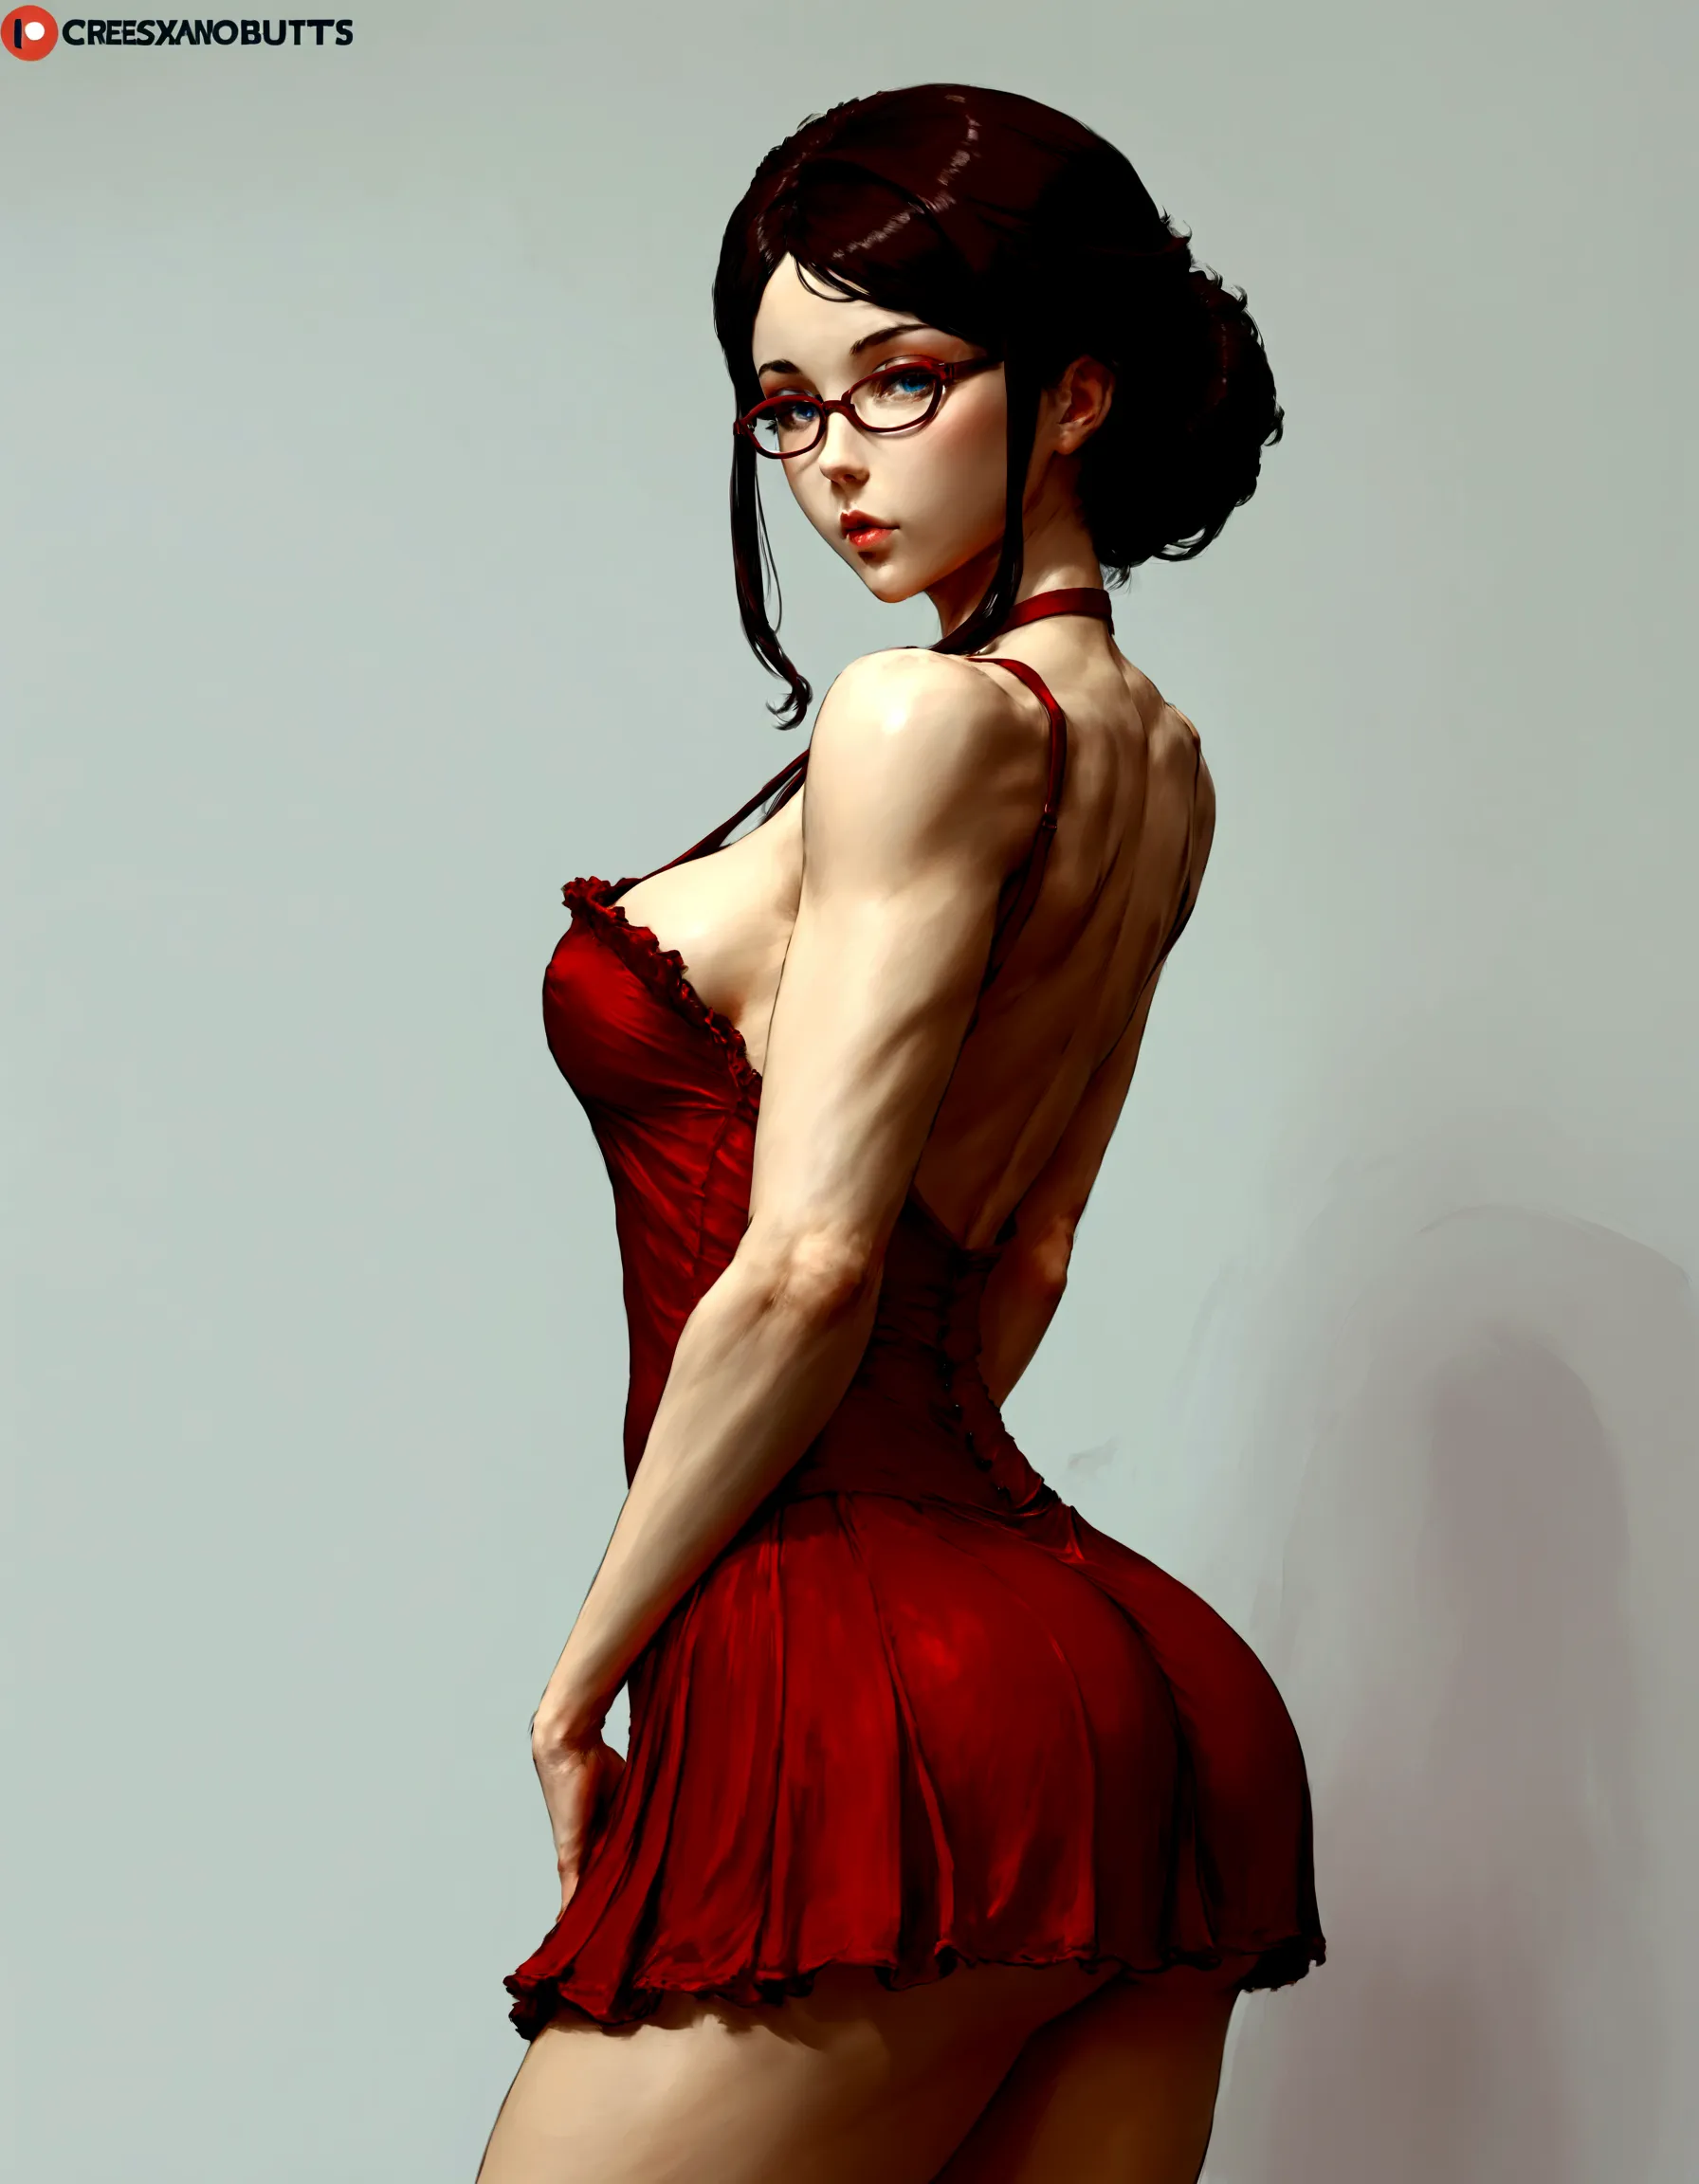 a woman in a short skirt and glasses is posing for a photo, uma garota アニメ hyper realist, hyper realist, fofasexyrobutts, realis...